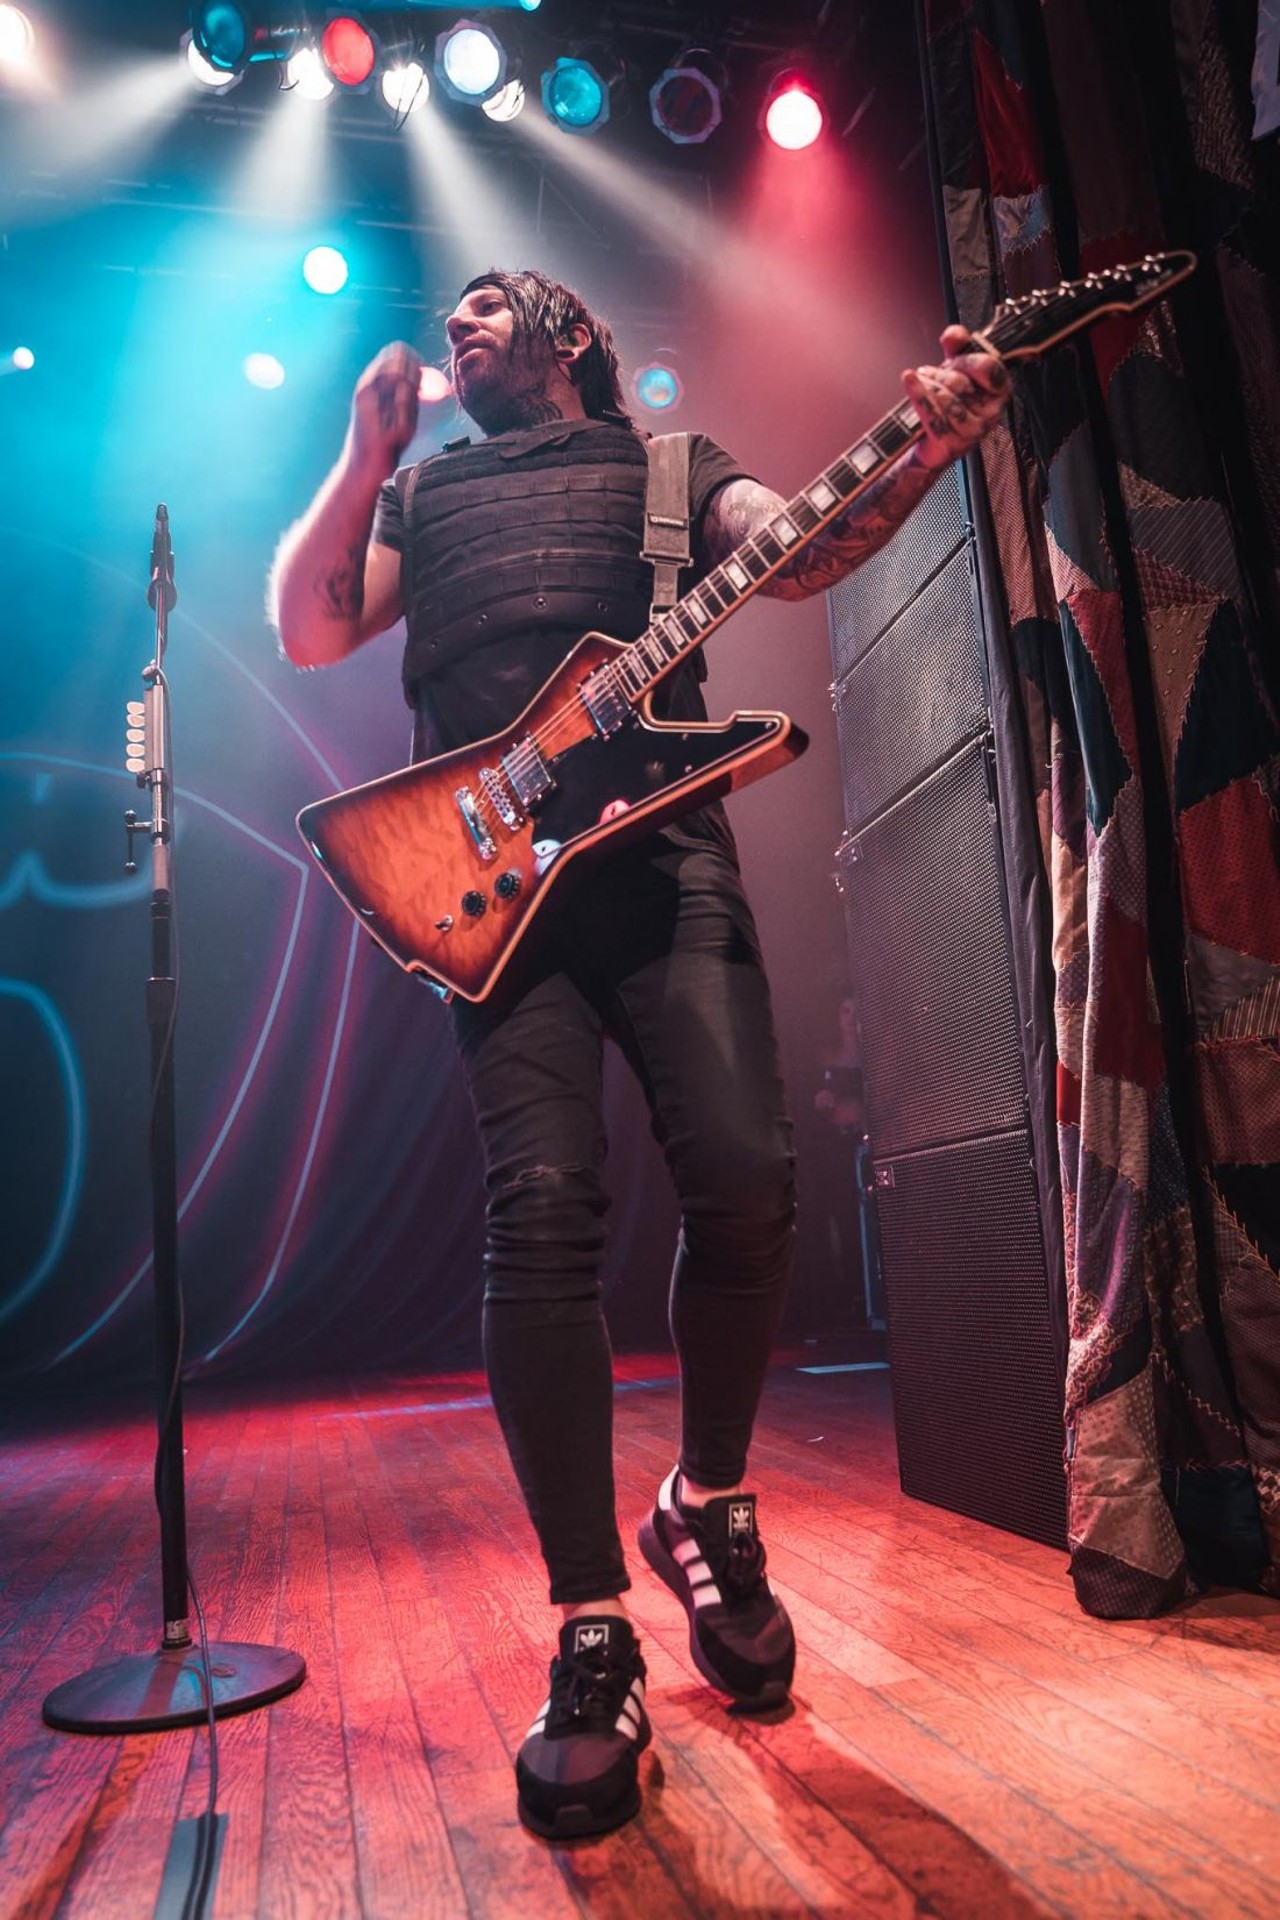 Photos From the Falling in Reverse Concert at House of Blues